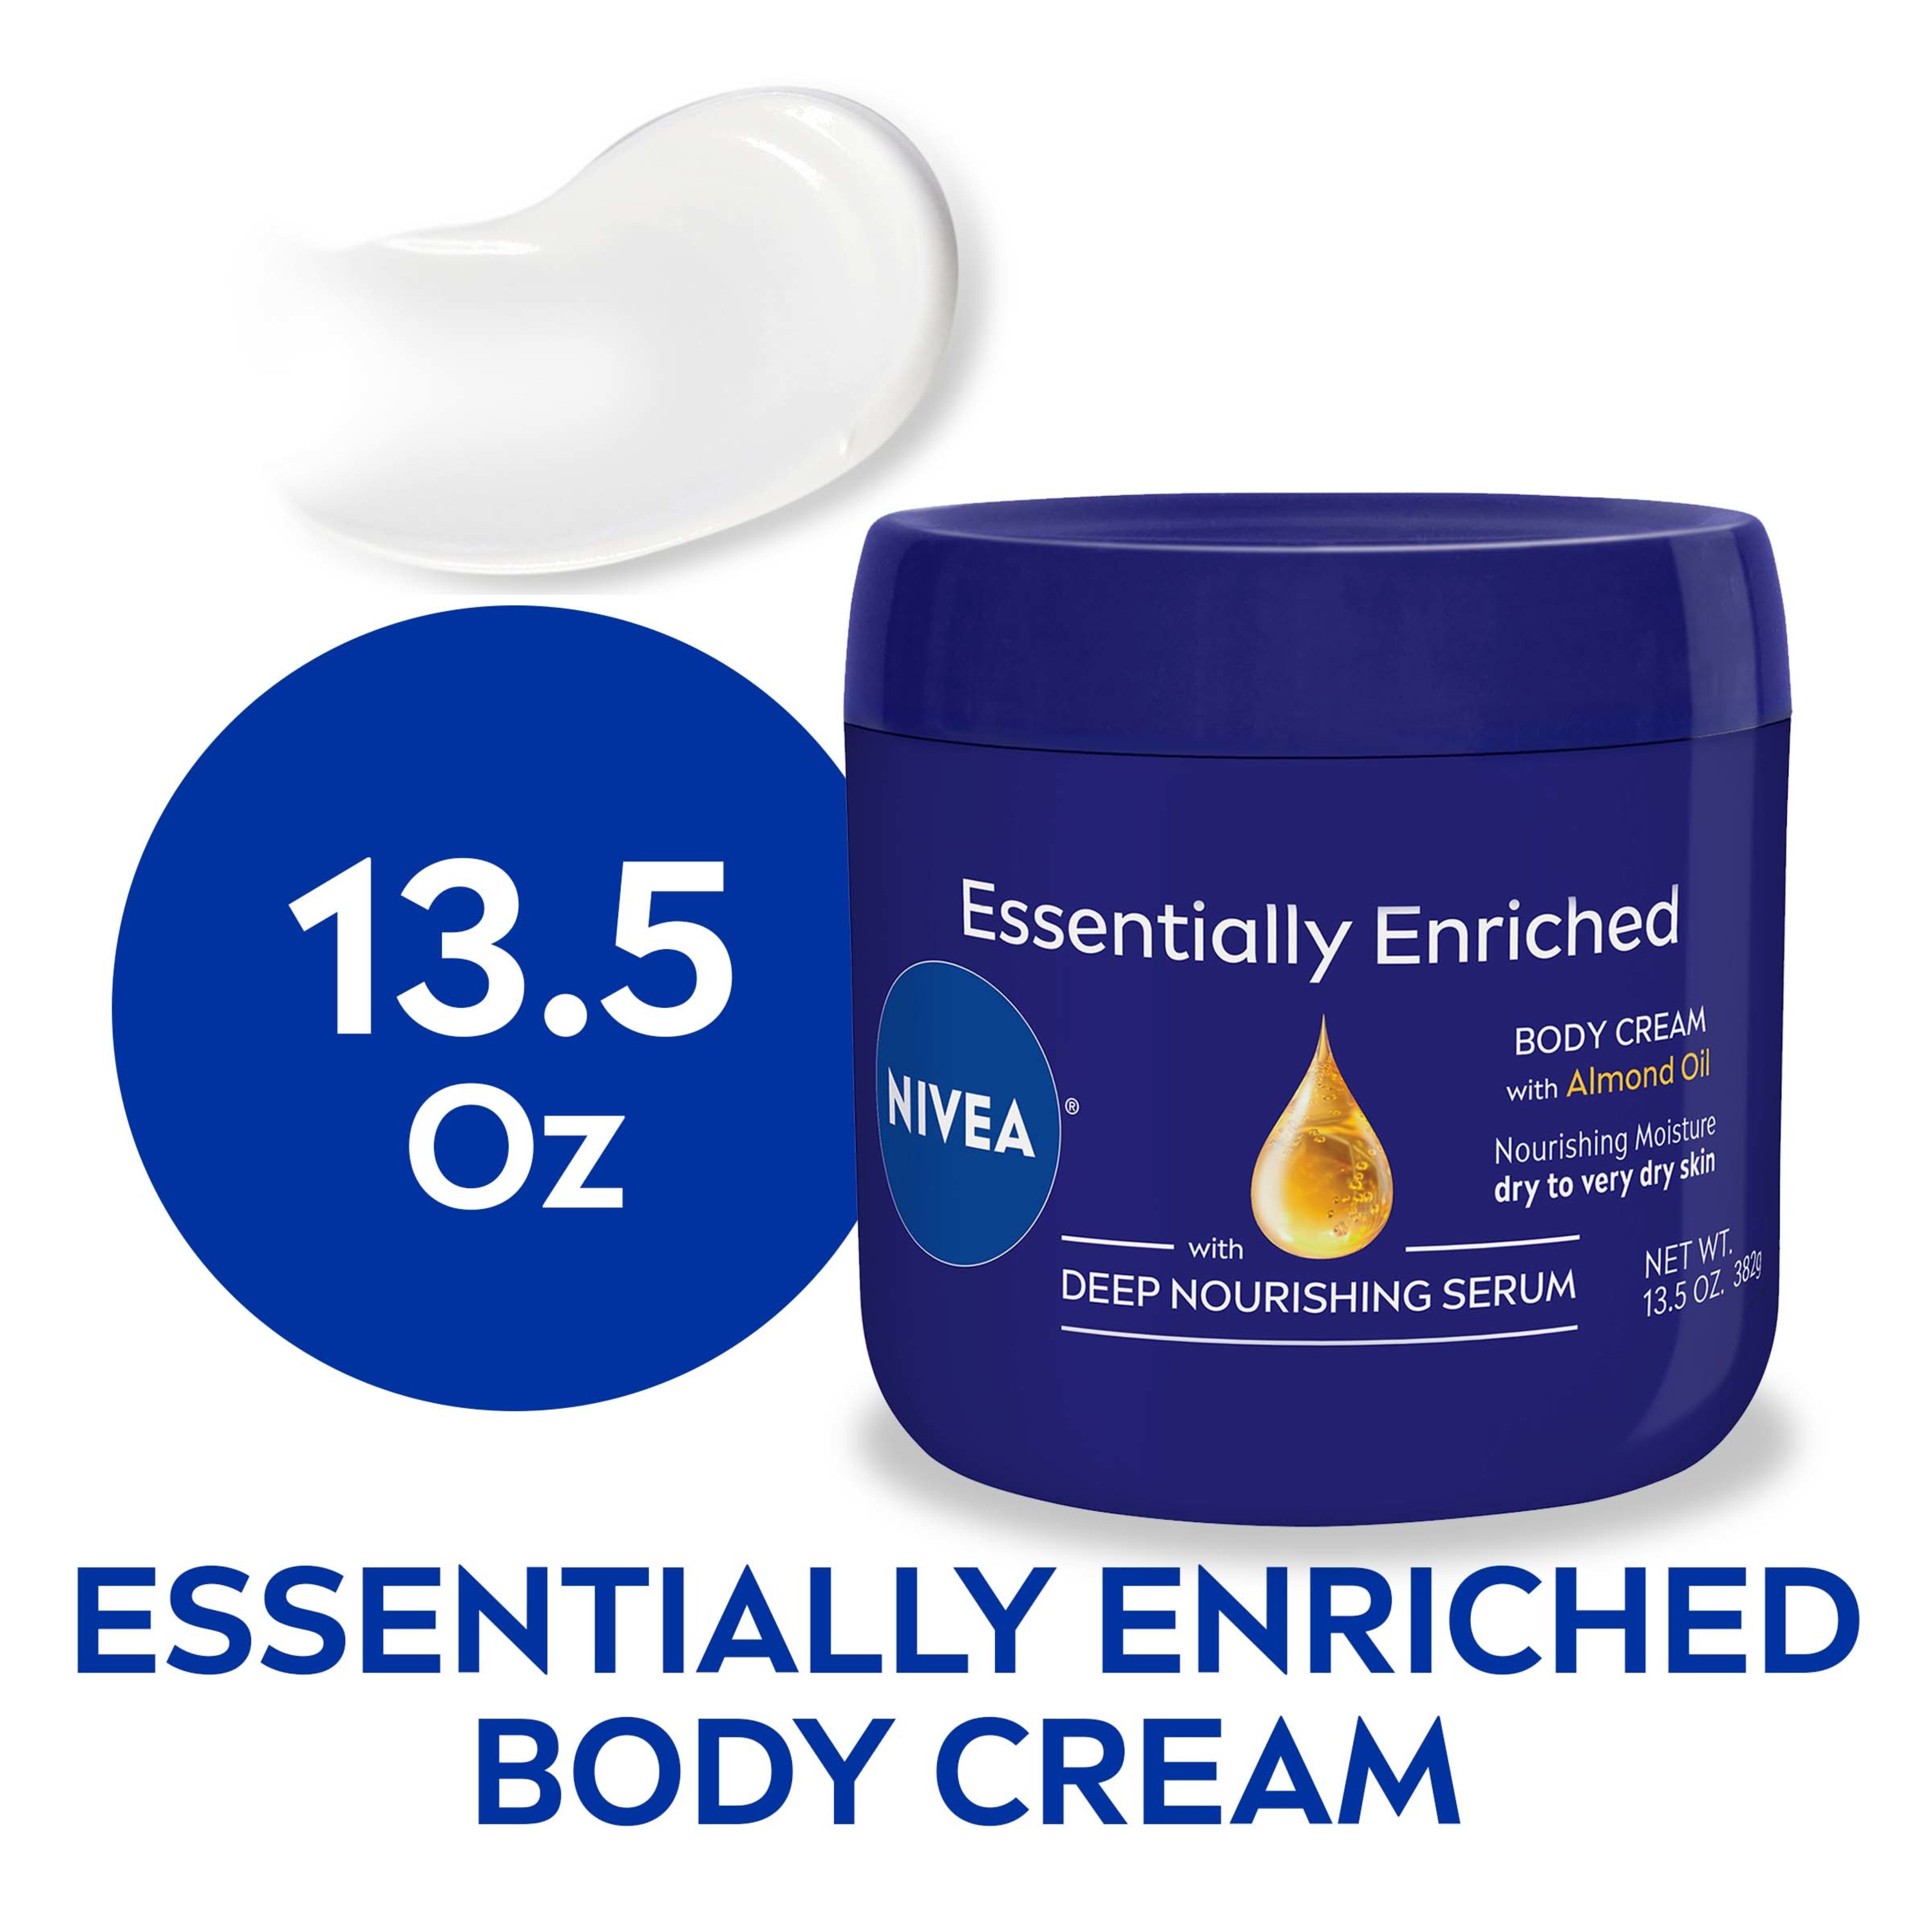 NIVEA Essentially Enriched Body Cream for Dry Skin and Very Dry Skin, 13.5 Oz Jar - image 1 of 13